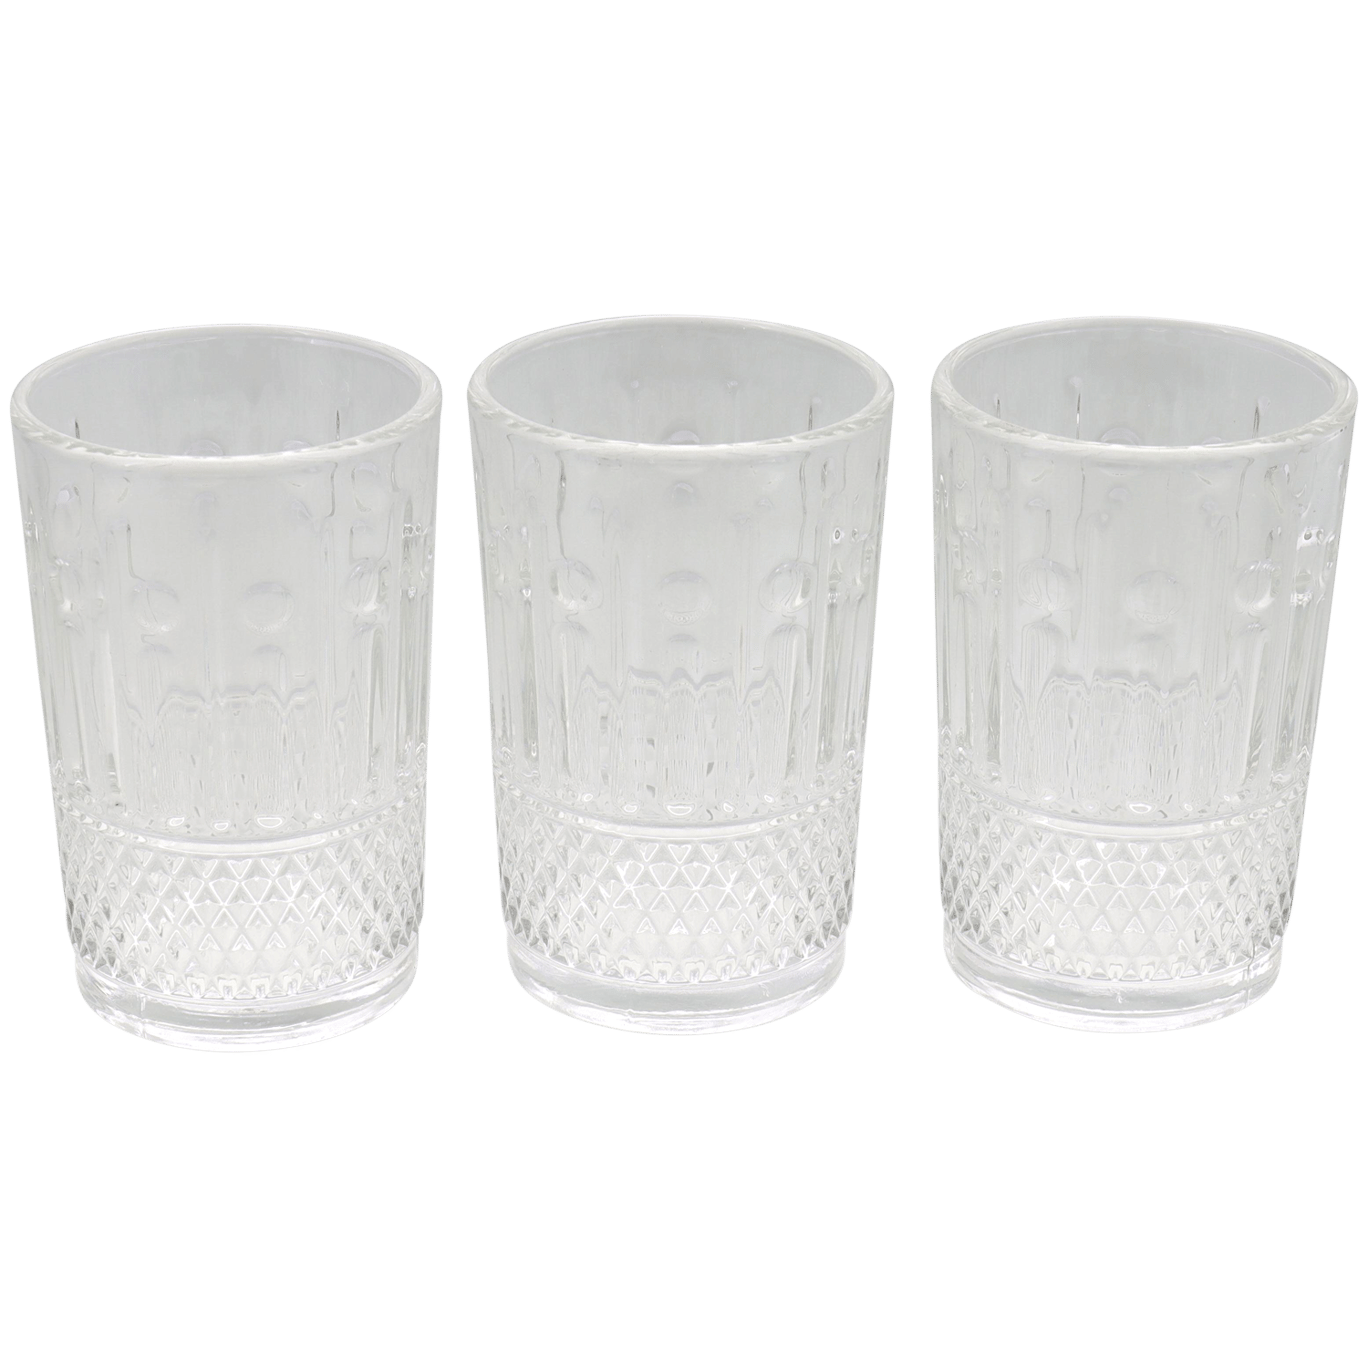 Water-/whiskyglas Action.com